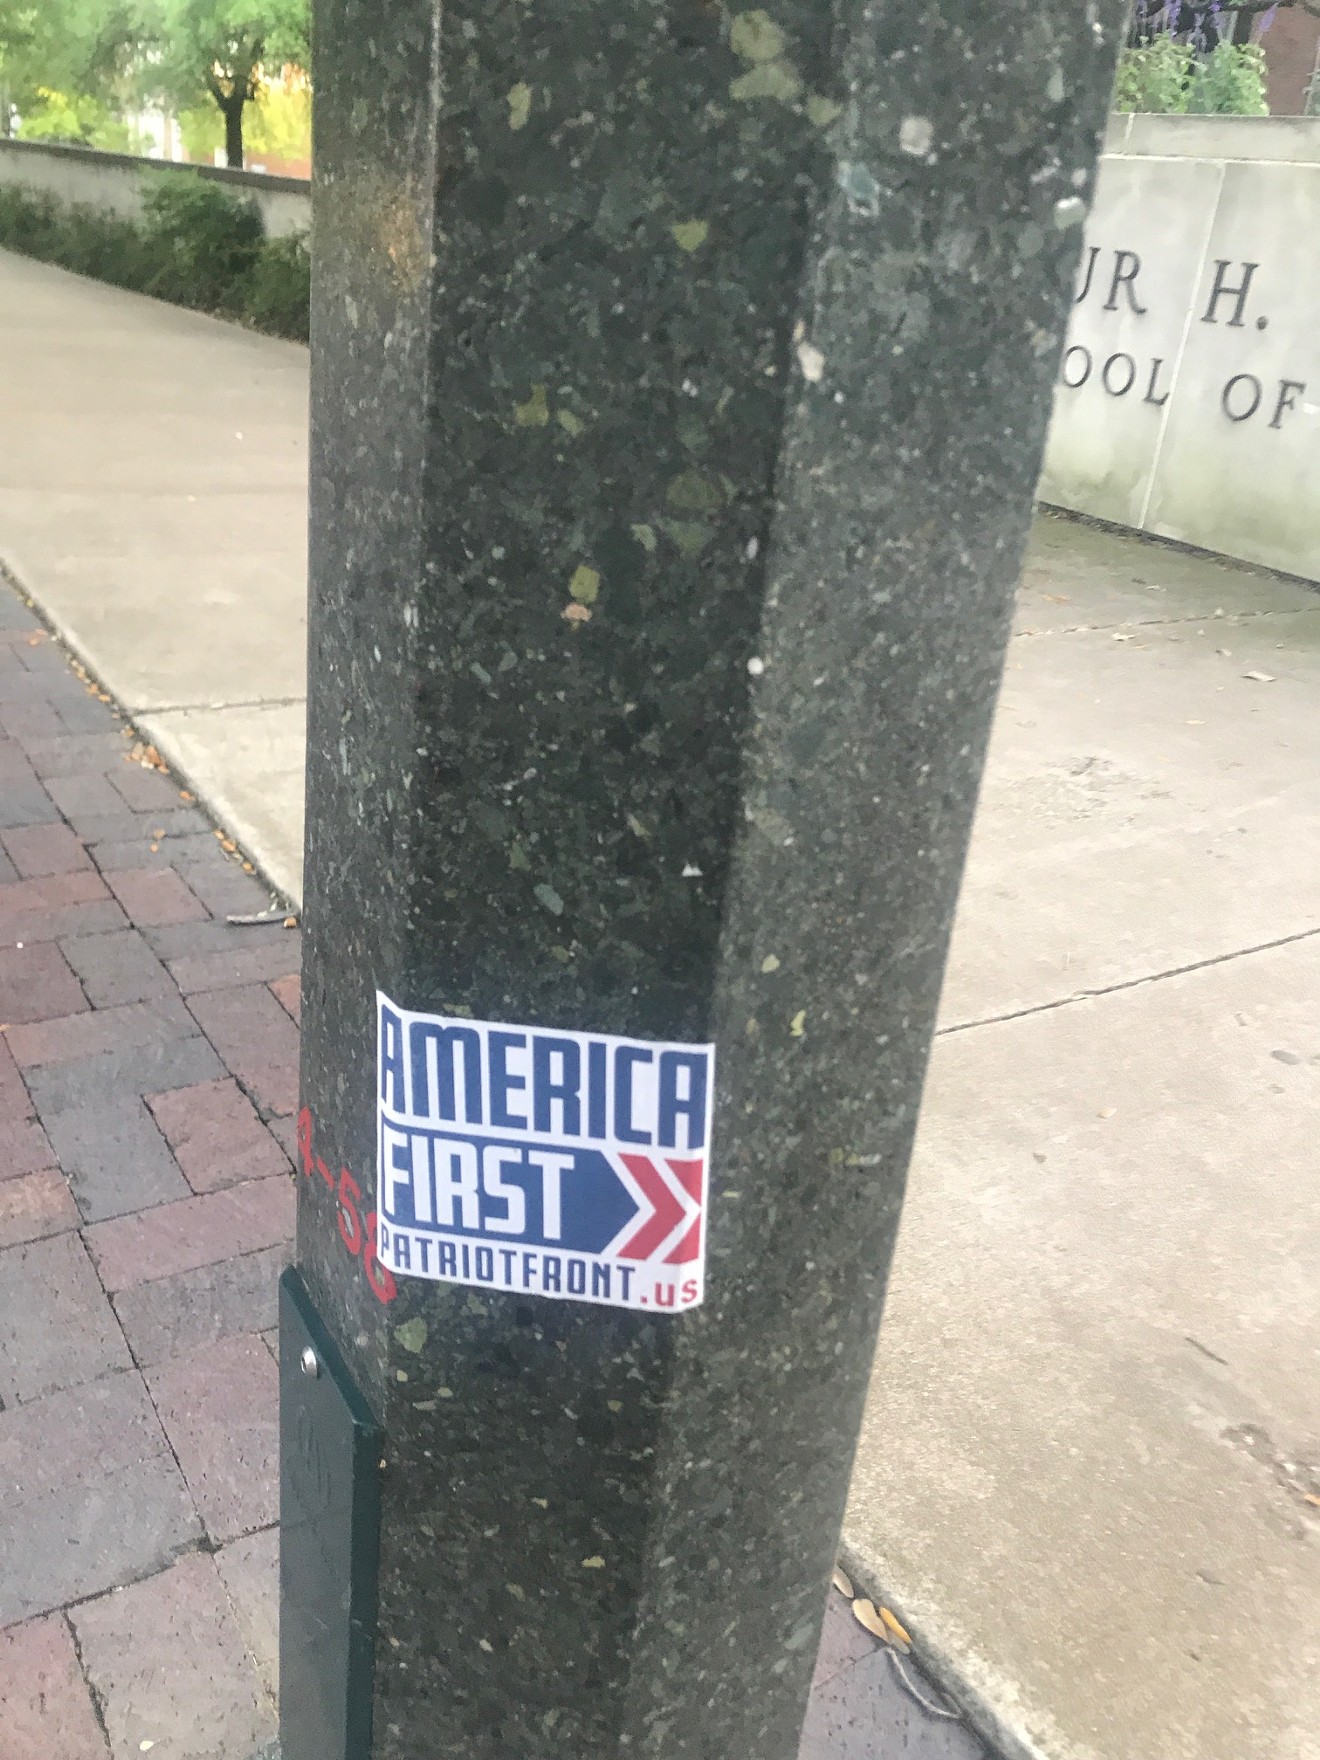 The white supremacist group Patriot Front posted stickers on campus at Southern Methodist University on April 21.